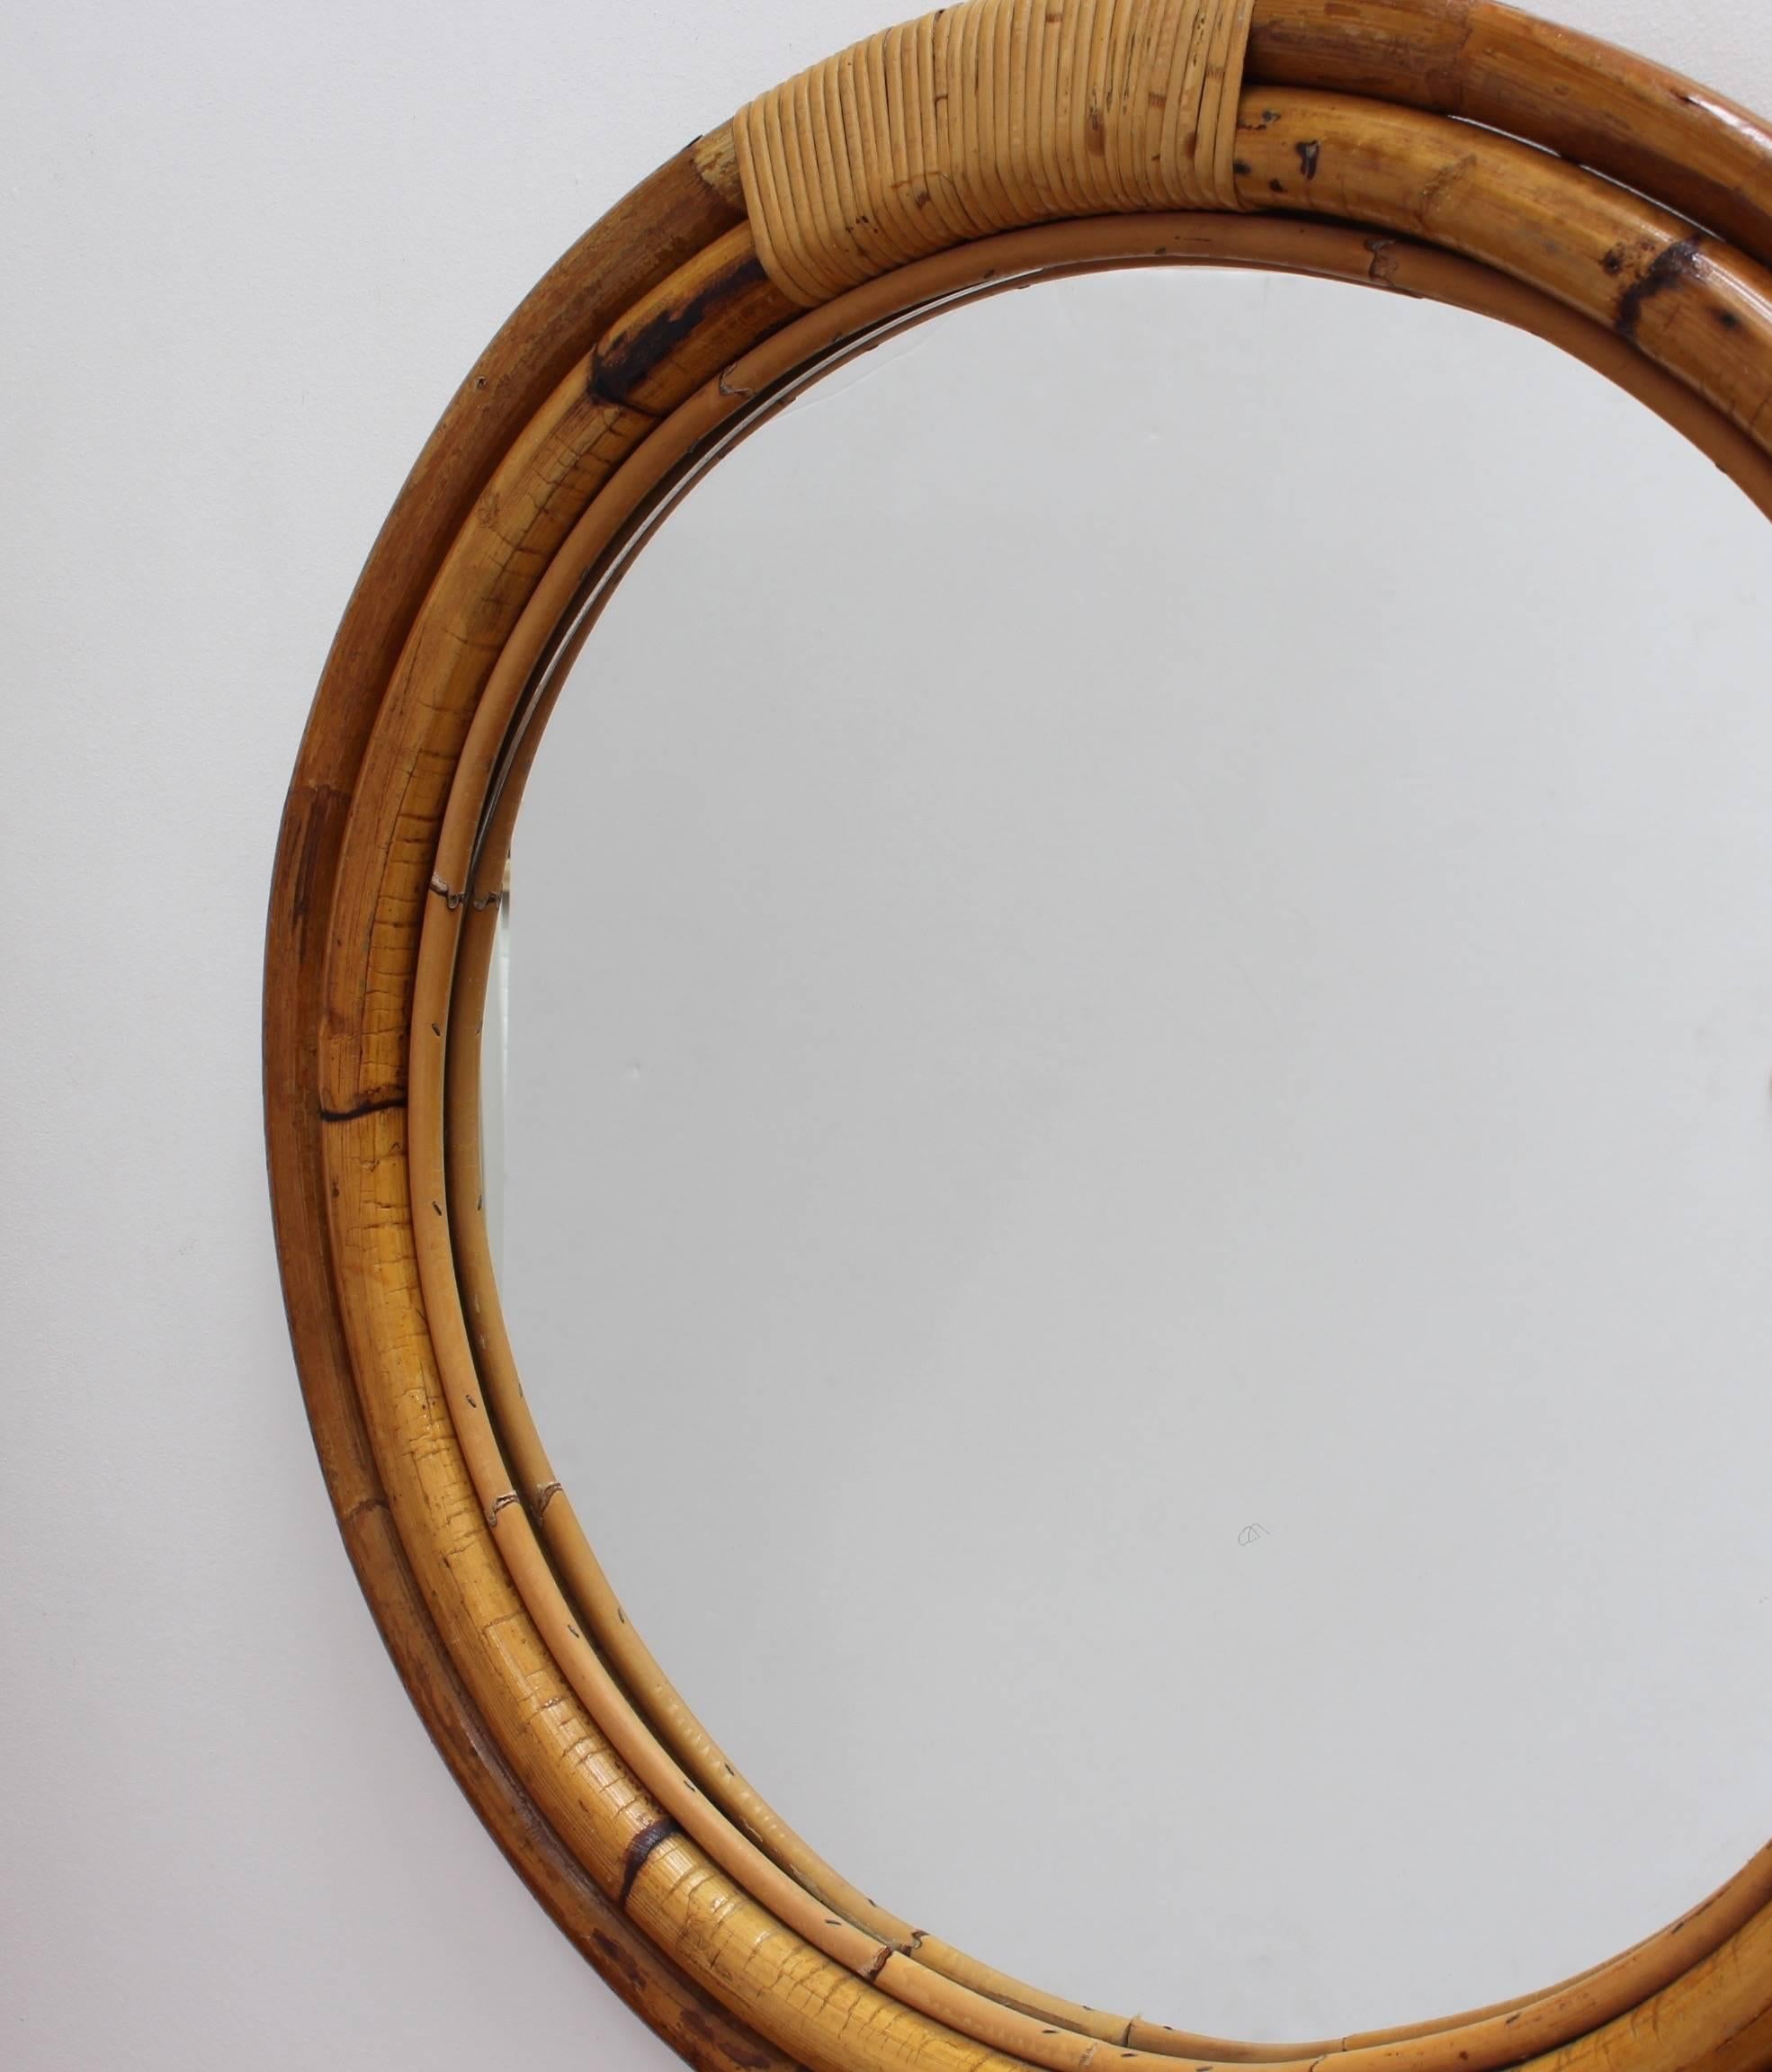 Italian 'porthole' style bamboo and rattan wall mirror circa 1960s. Three concentric tubular rounds of both bamboo and rattan form the structural frame for this porthole mirror with bands of binding rattan. There is a graceful, aged patina on the